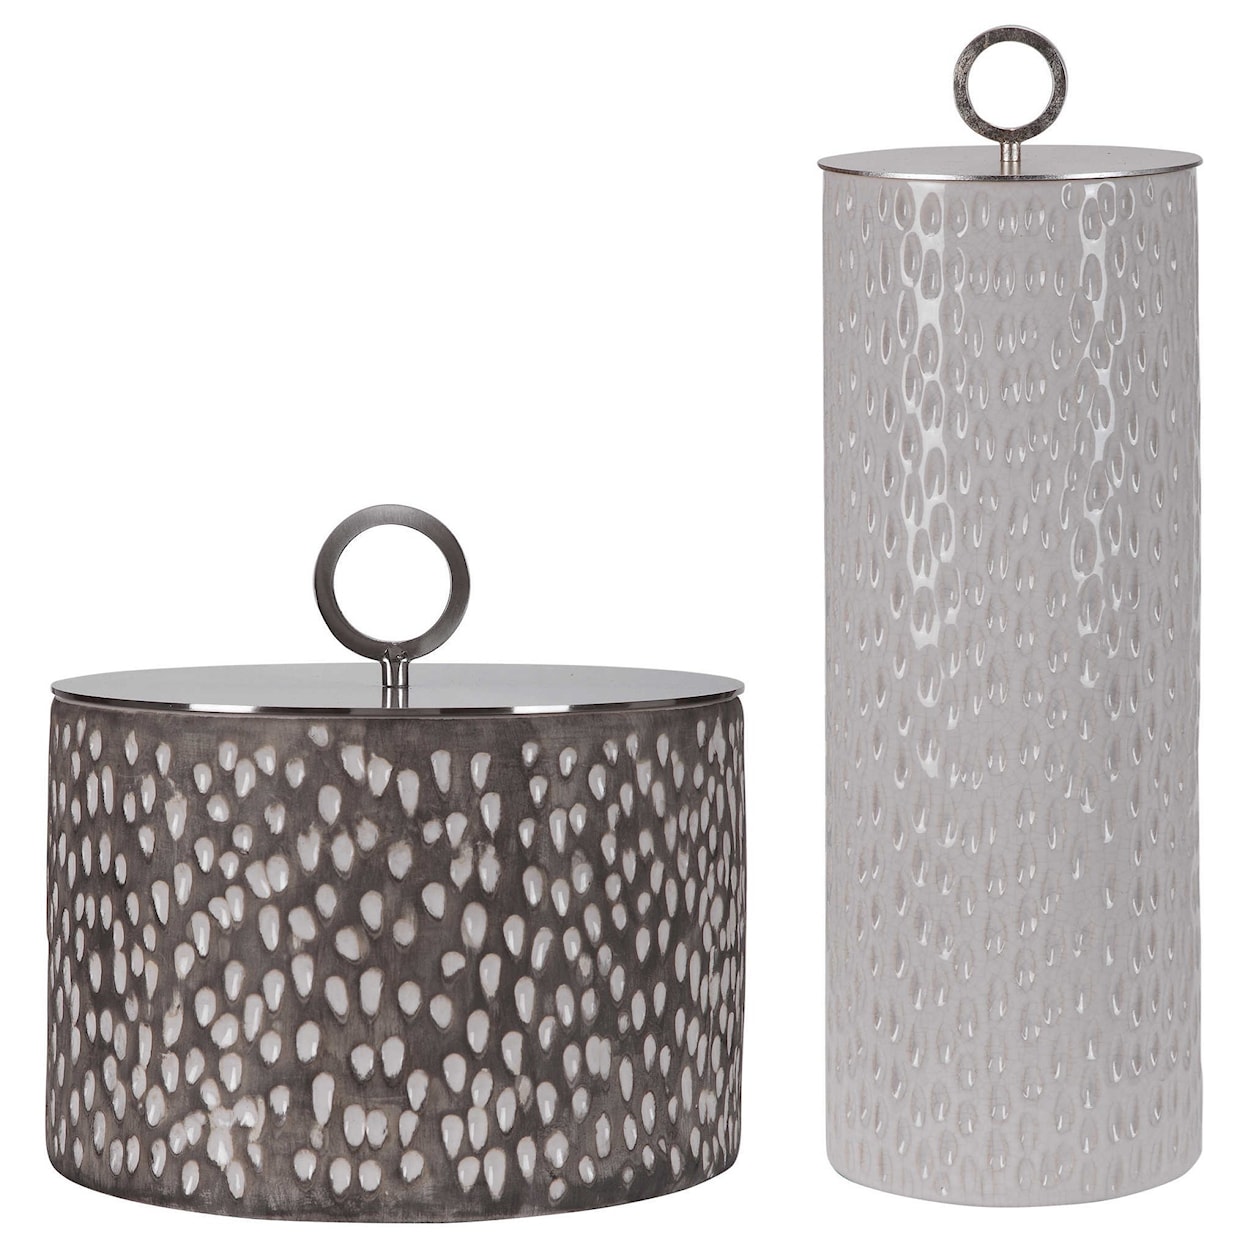 Uttermost Accessories Cyprien Ceramic Containers, S/2